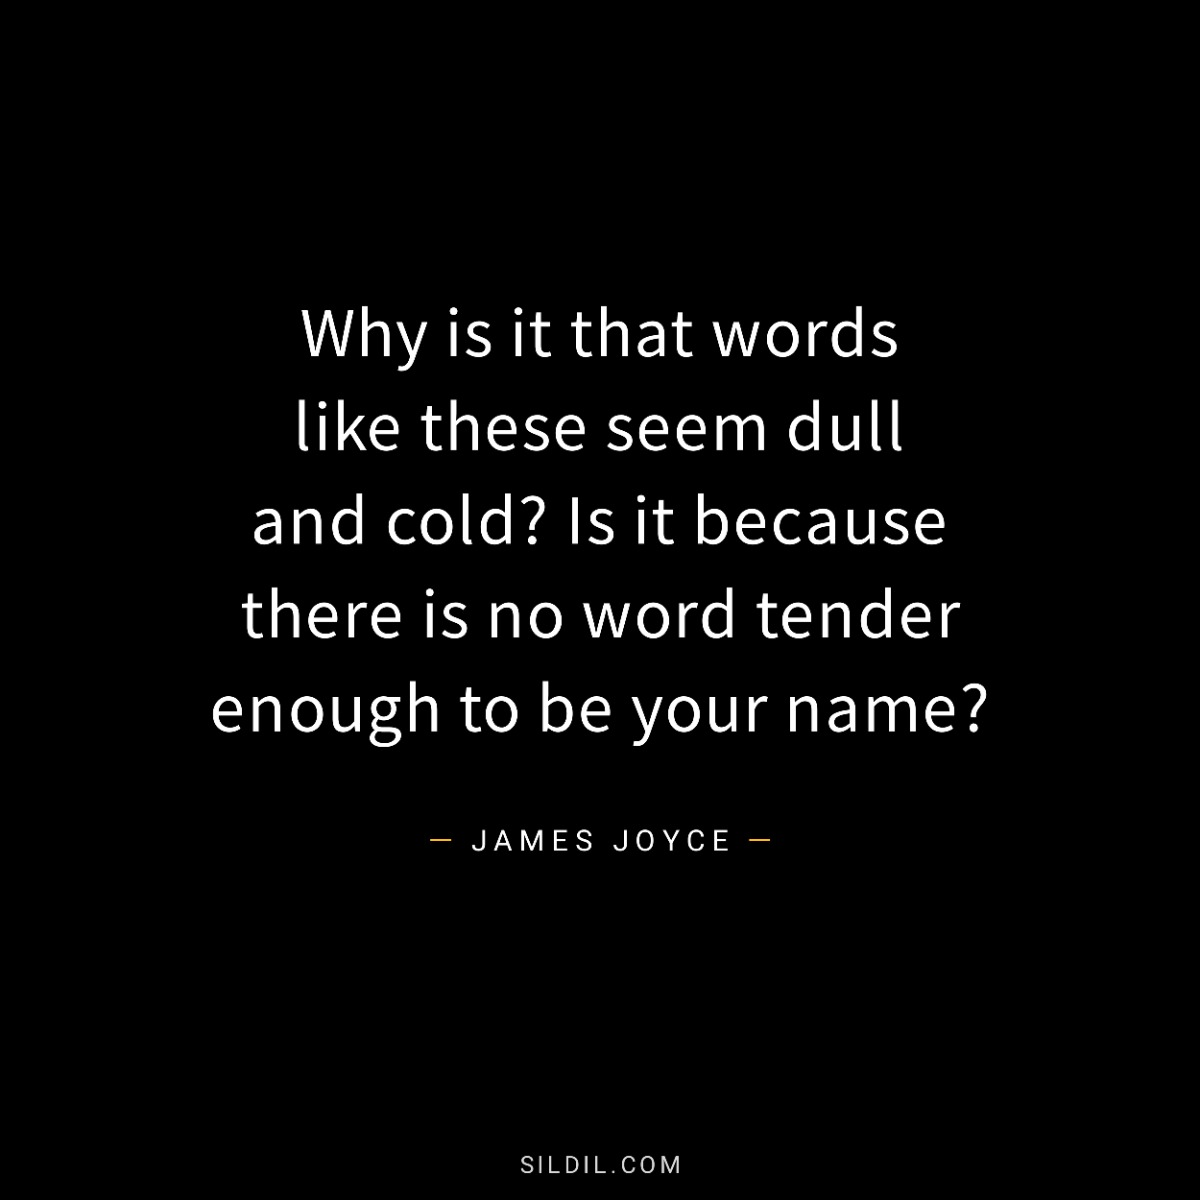 Why is it that words like these seem dull and cold? Is it because there is no word tender enough to be your name?